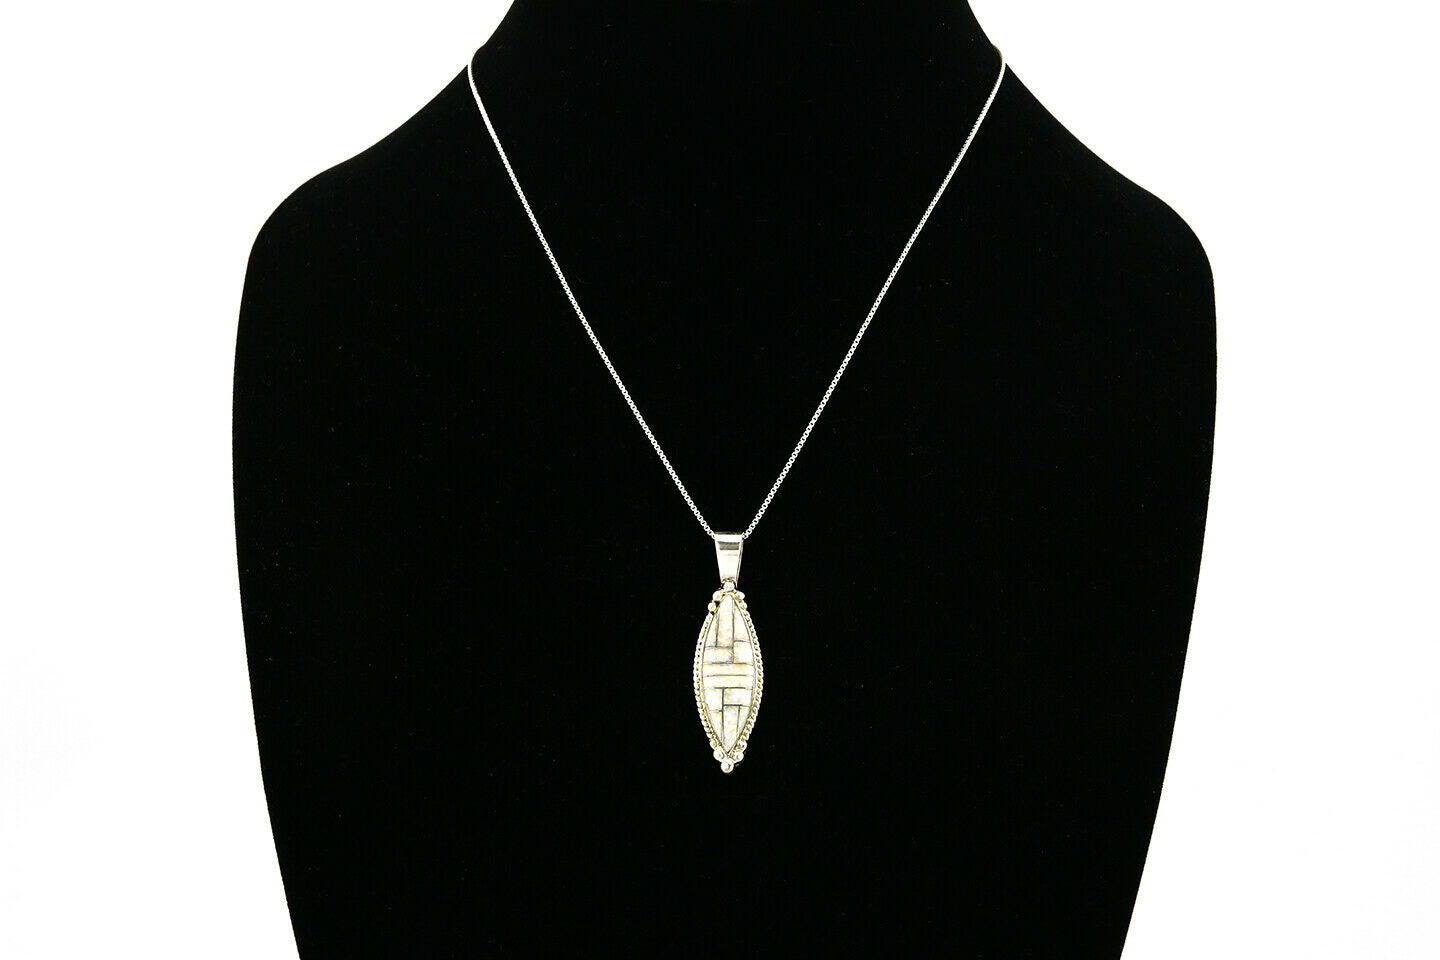 Navajo Inlaid Pendant .925 Silver Simulated Opal Handmade Necklace